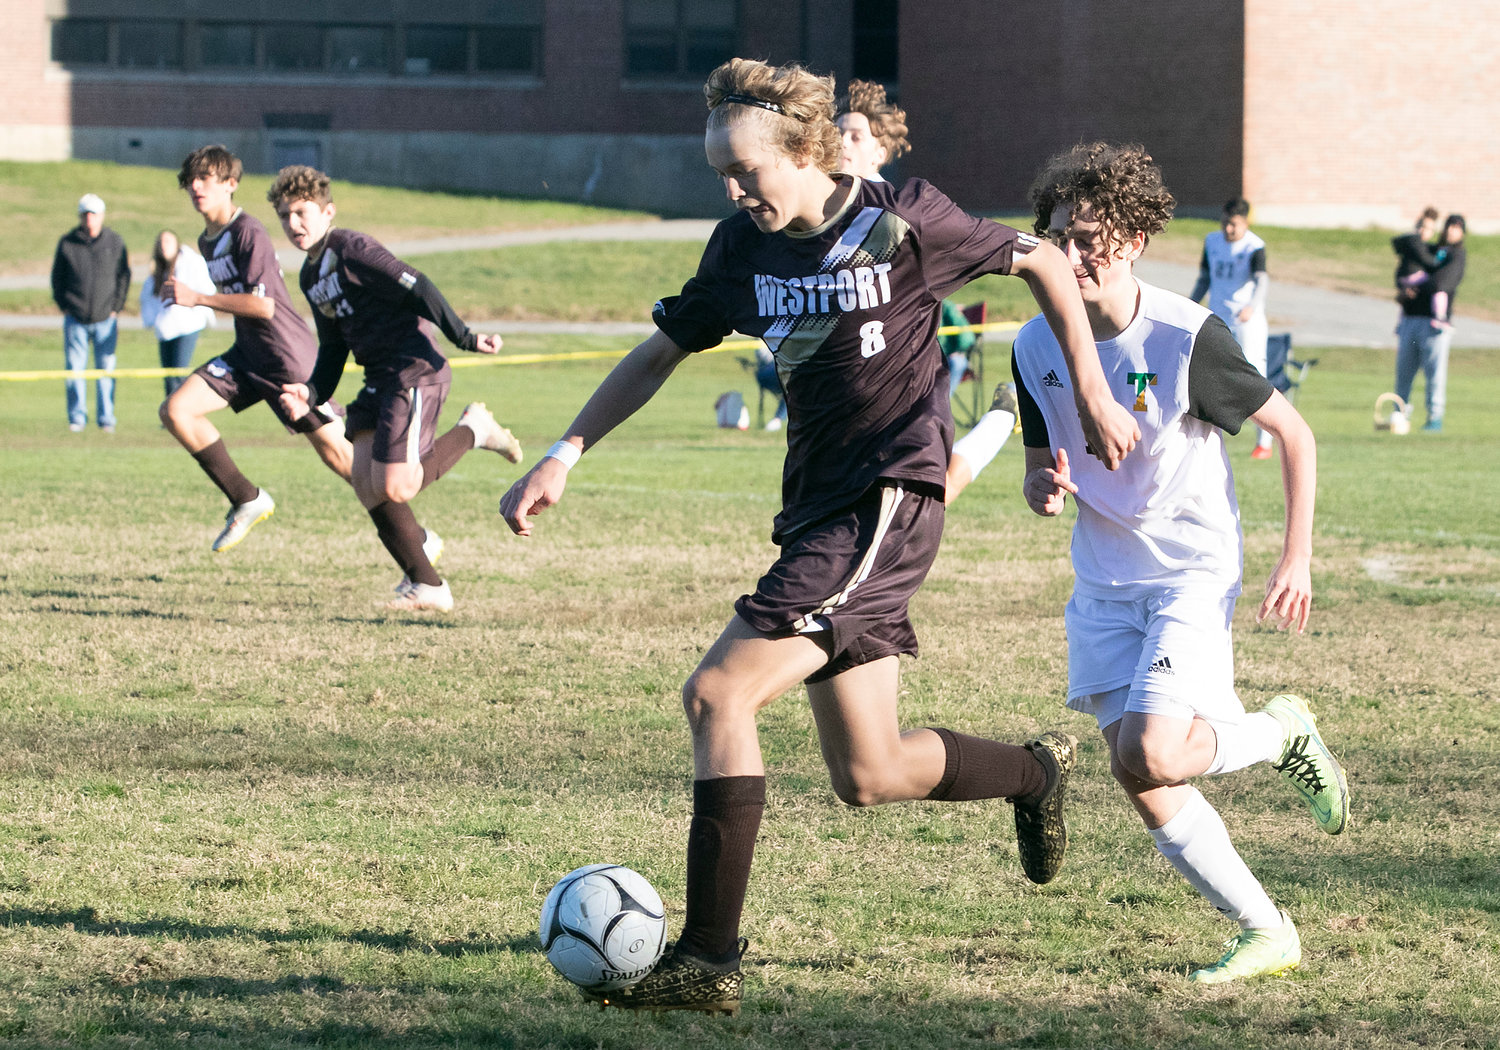 Coltrane McGonigle dribbles up the sideline with the ball. The junior scored the Wildcats first goal by heading a cross from Antonio Dutra Africano, into the goal for a Westport, 1-0 lead.